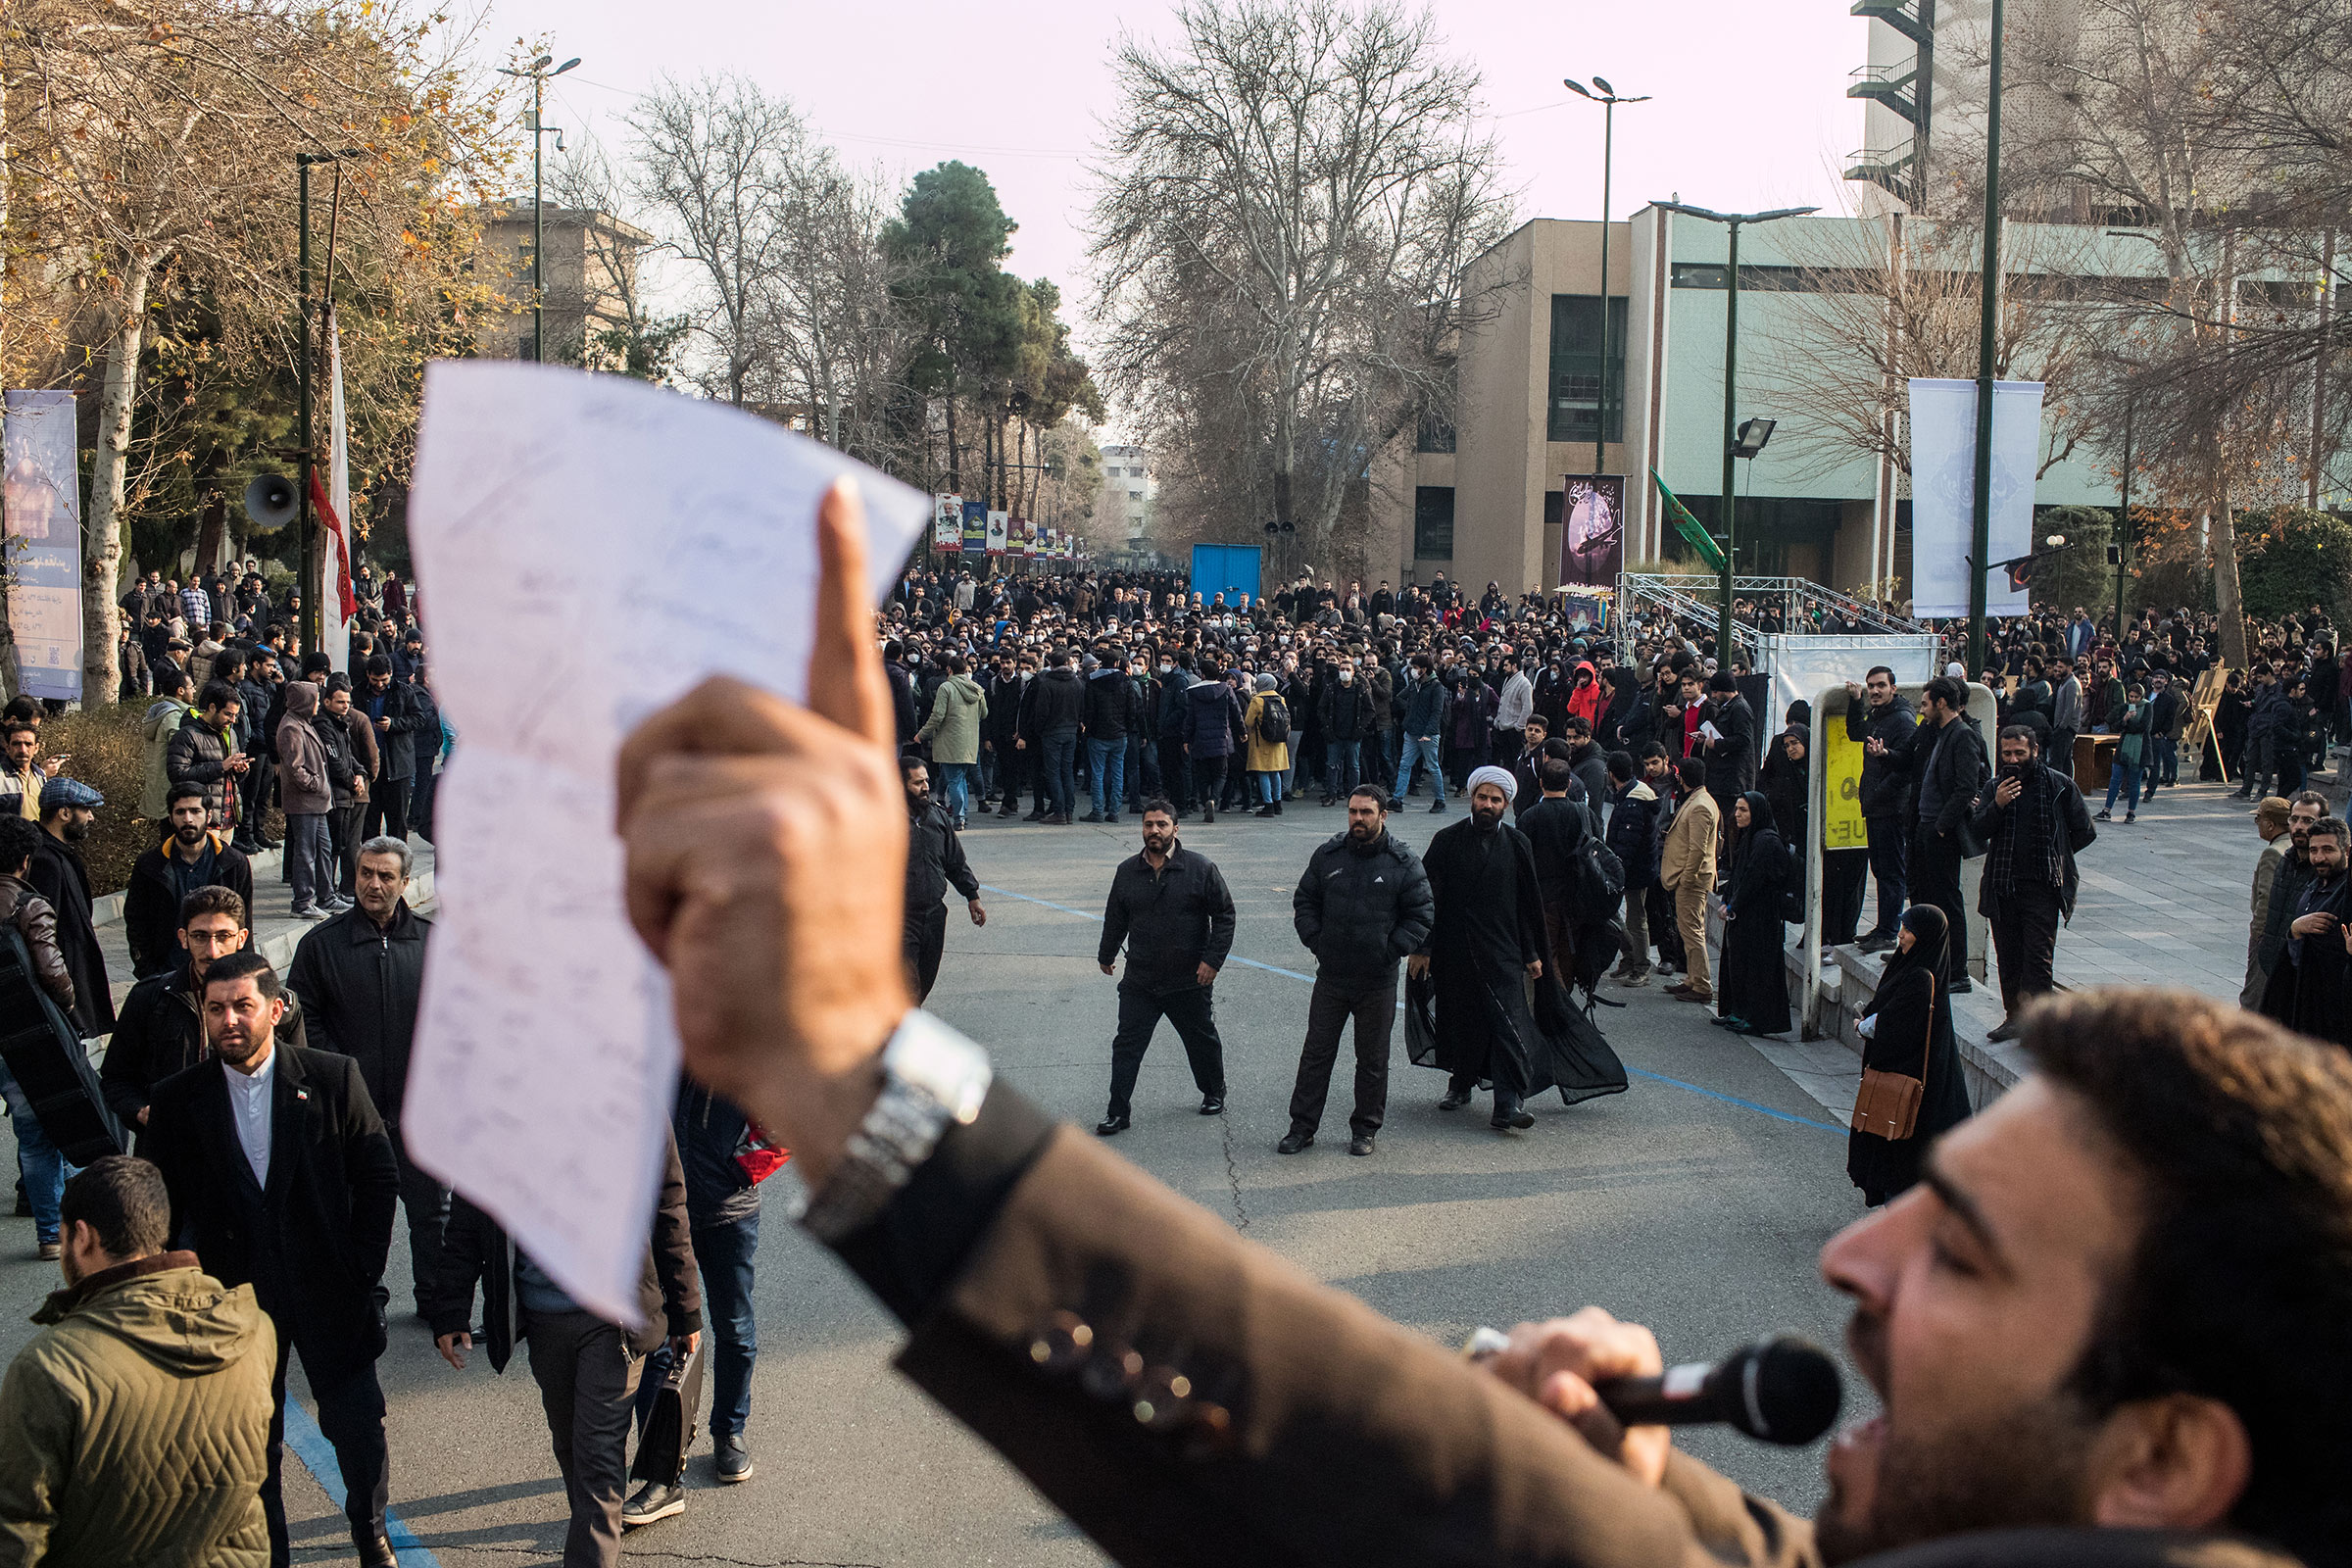 January 14, 2020 - Tehran, Iran: Students protest against the government at Tehran University at the same time when the pro-government students are holding a memorial for Major Gen. Qasem Soleimani in Tehran, Iran. (Arash Khamooshi—Polaris)